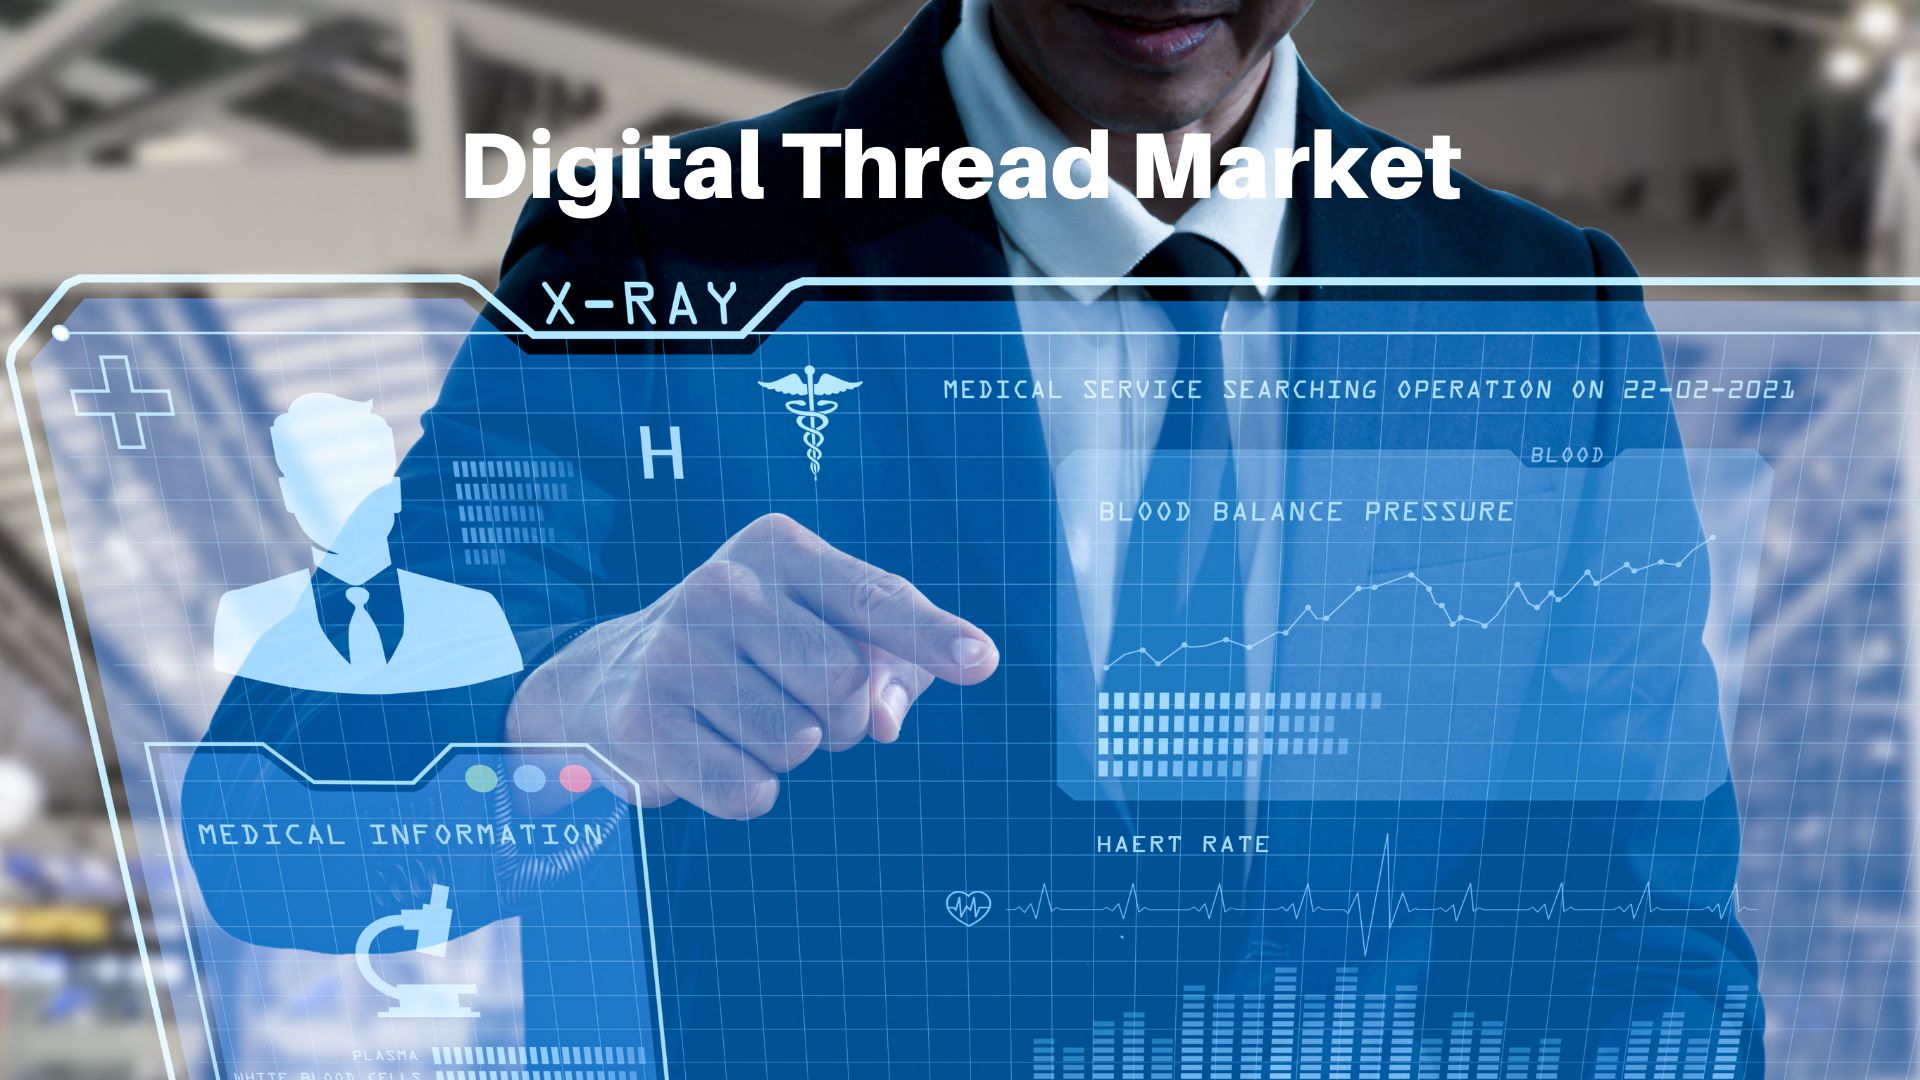 Digital Thread Market Research Findings and CAGR of 31.8% by 2032